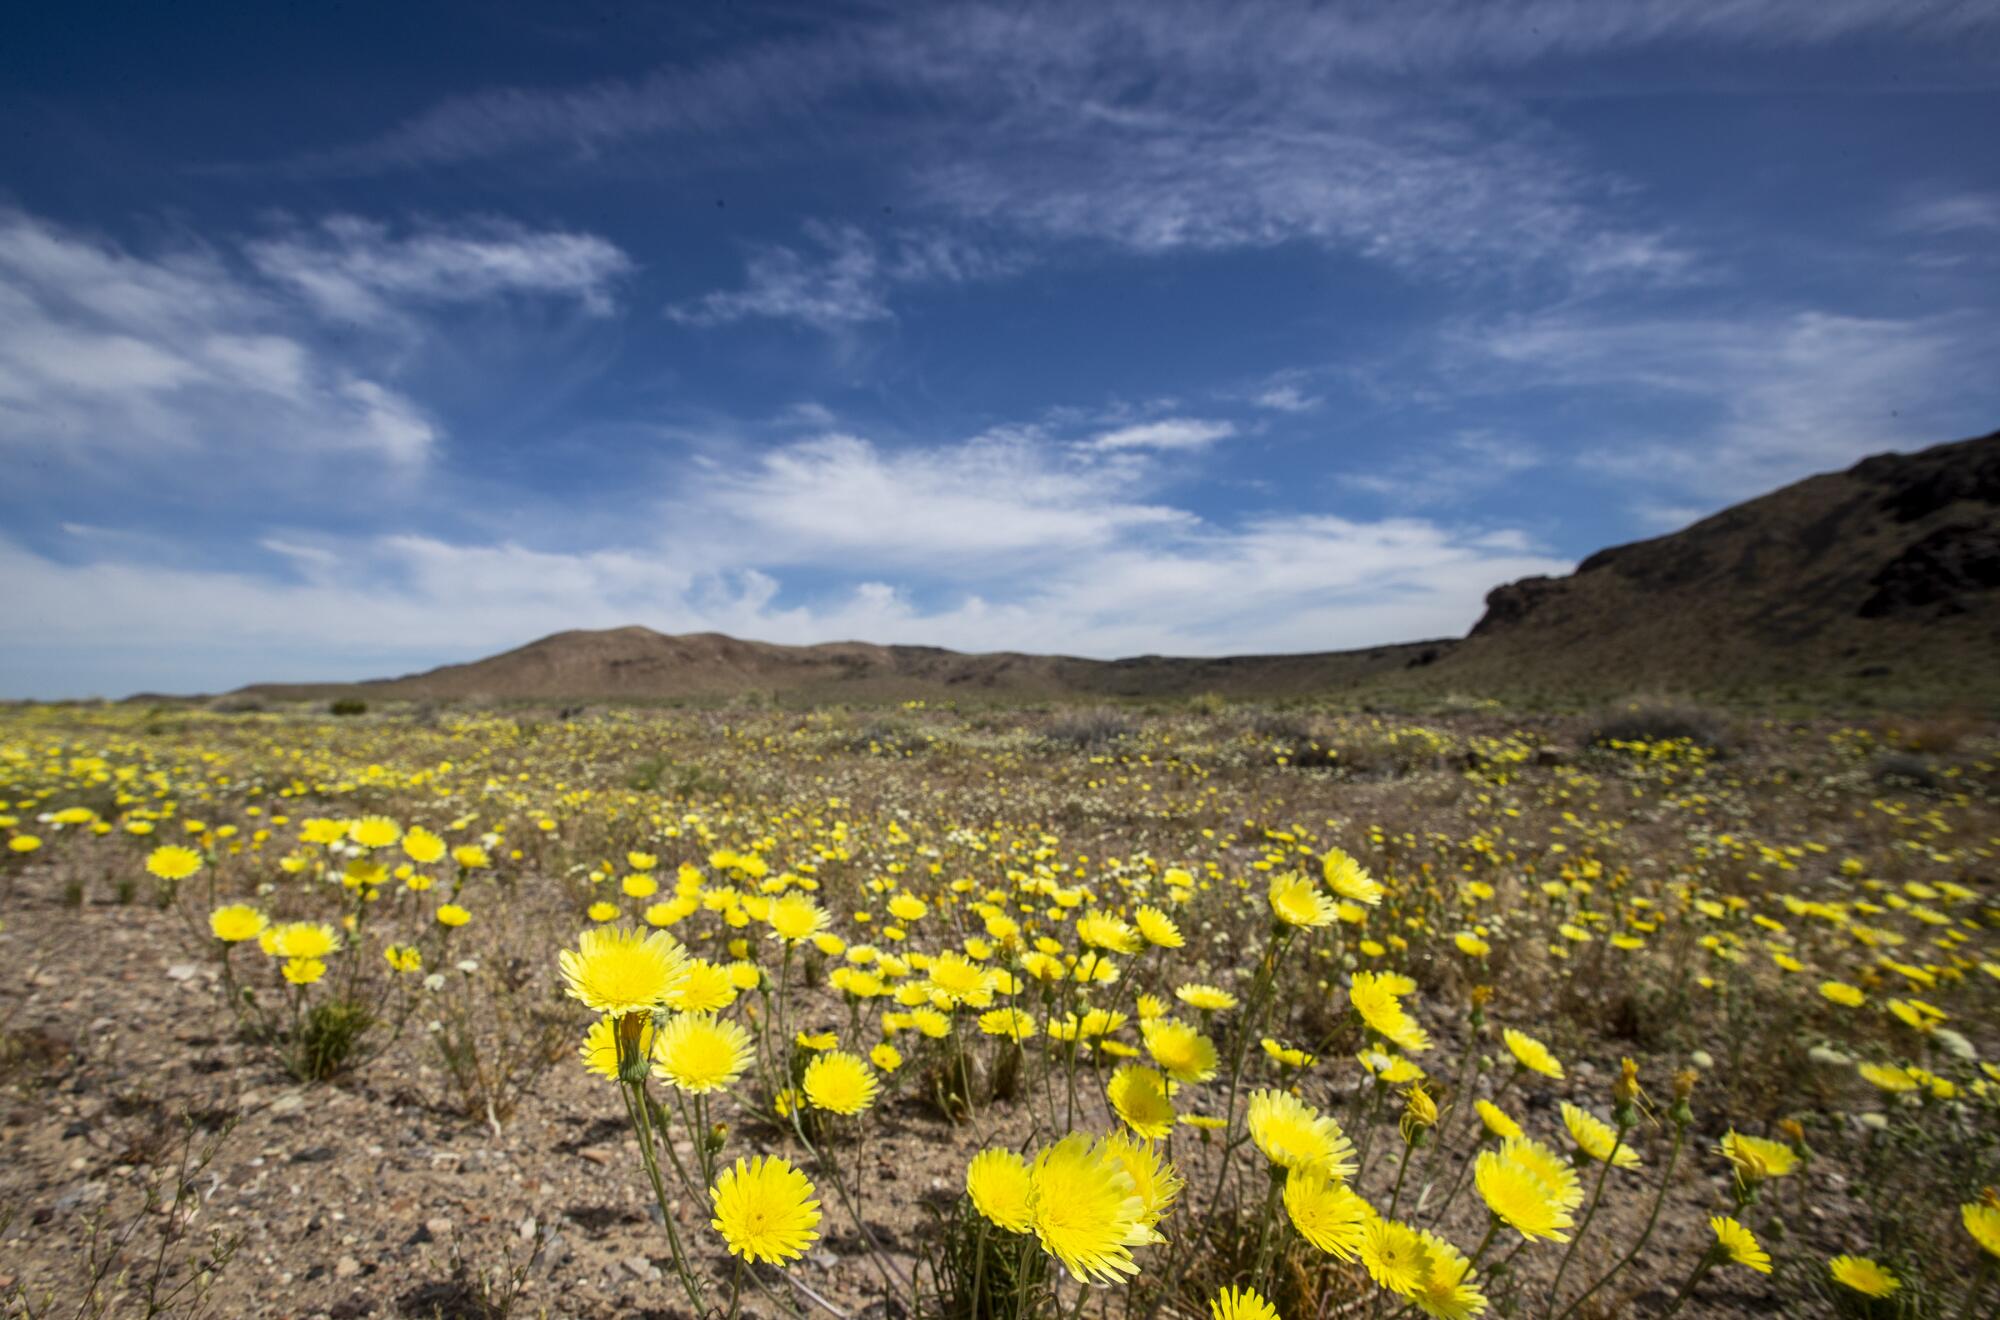 Desert dandelions and desert pincushions carpet an area frequented by pronghorn antelope near the Mojave Desert town of Beatty, Nev.